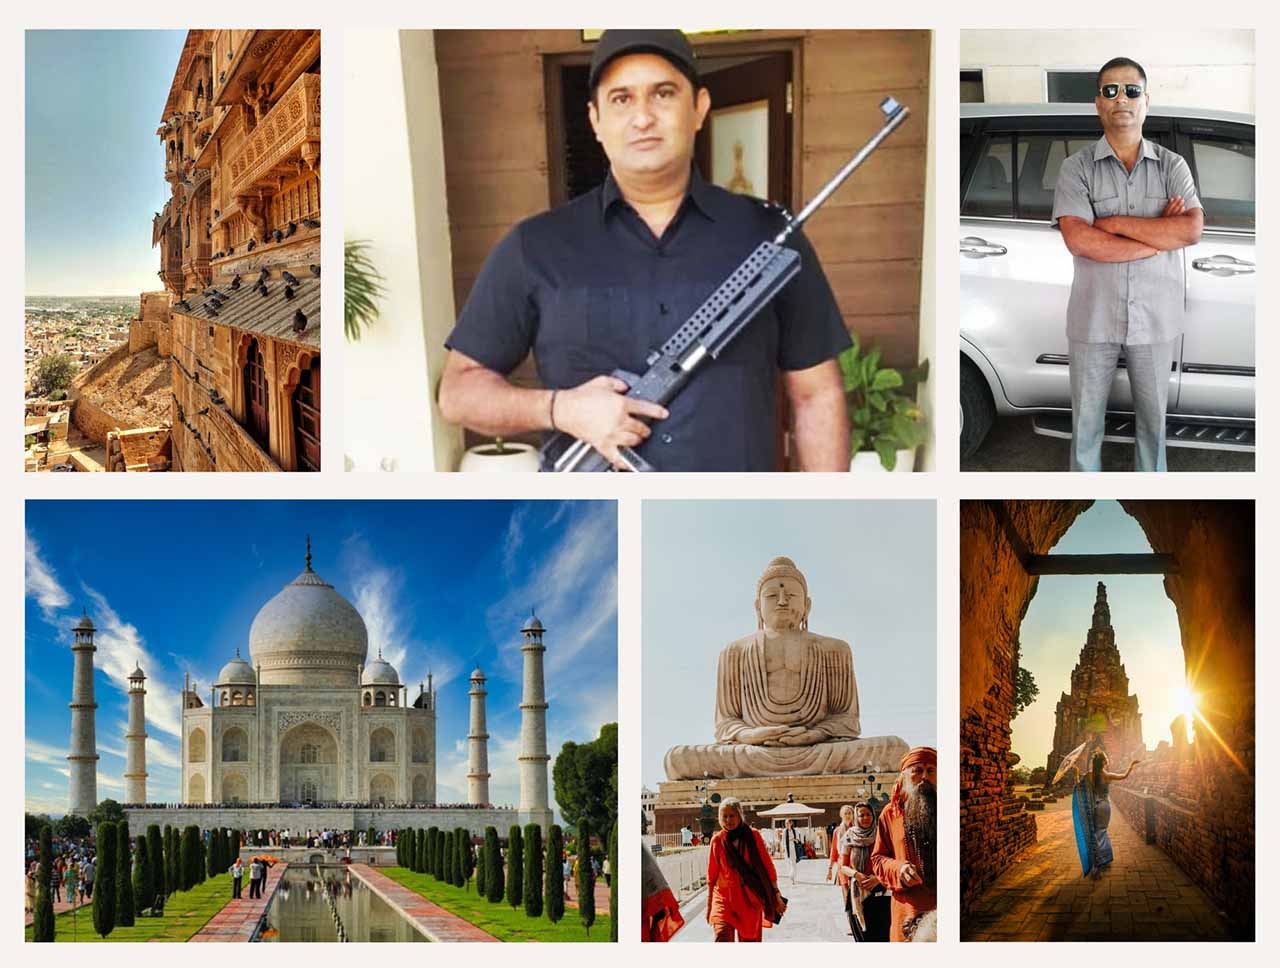 bodyguard service for tourits in India